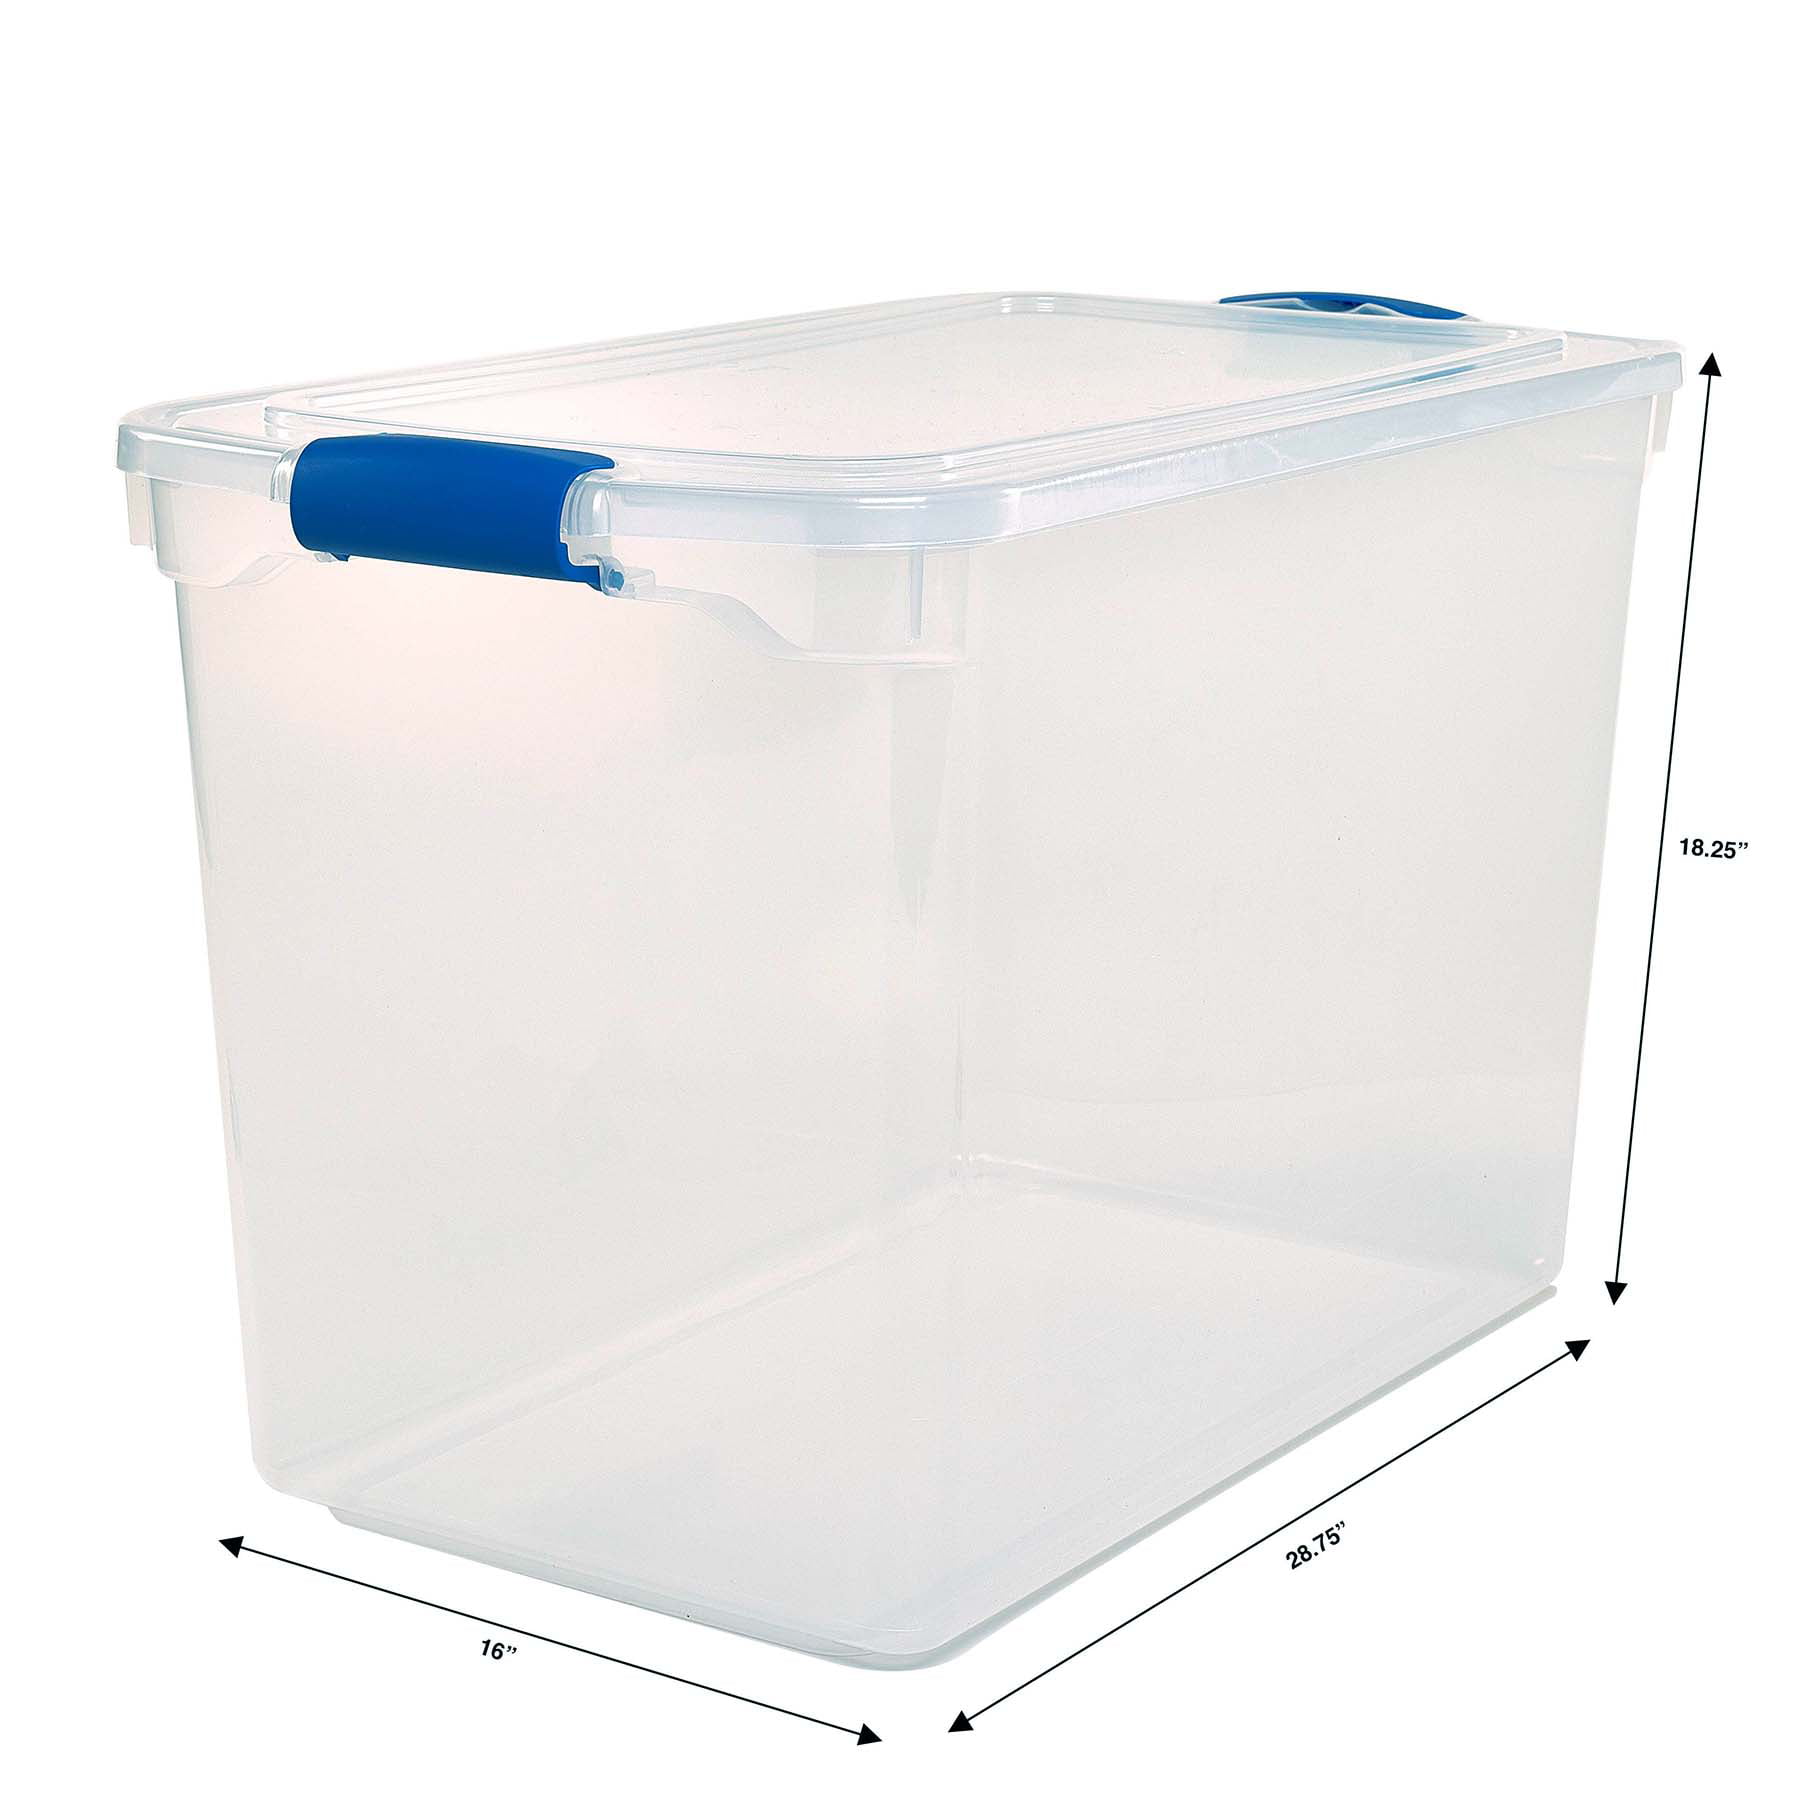  Multi Color Plastic Storage Totes and Stackable Storage Bins -  Industrial Strength Containers for Organizing at the Office and Home -  Holds Up To 80 Lbs - 23 x 15